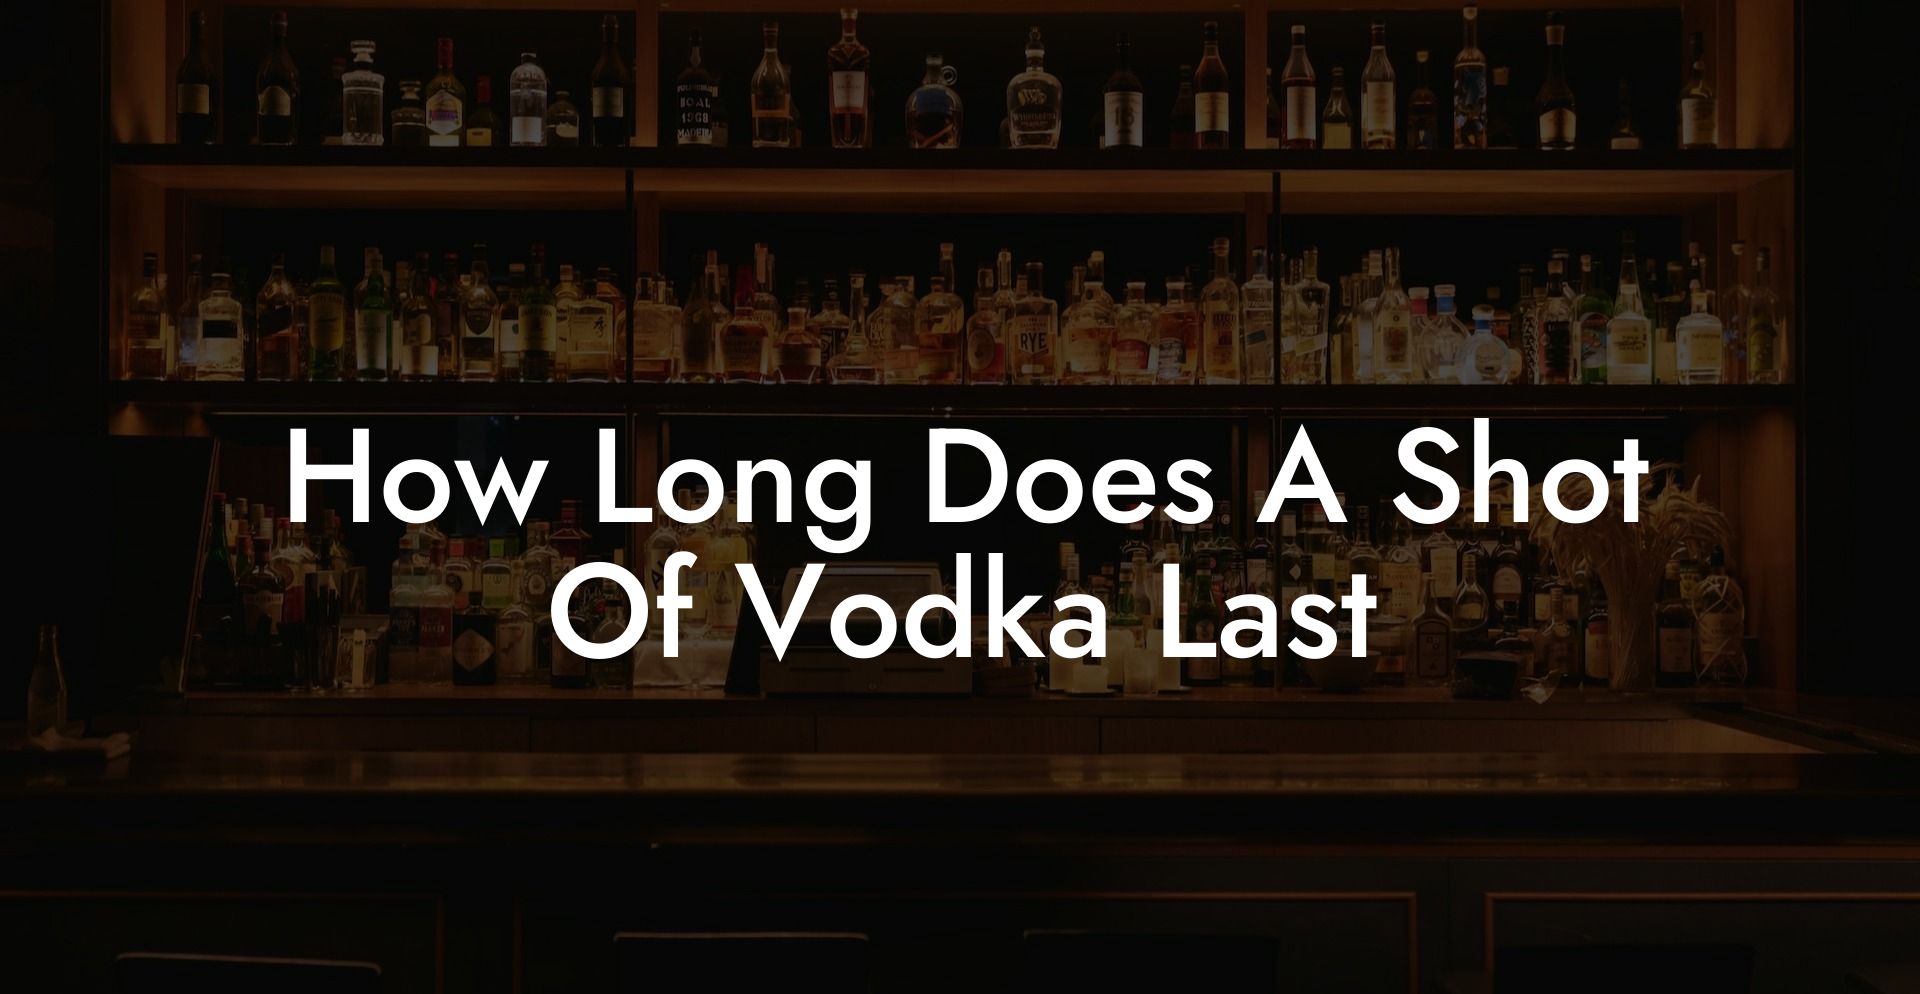 How Long Does A Shot Of Vodka Last